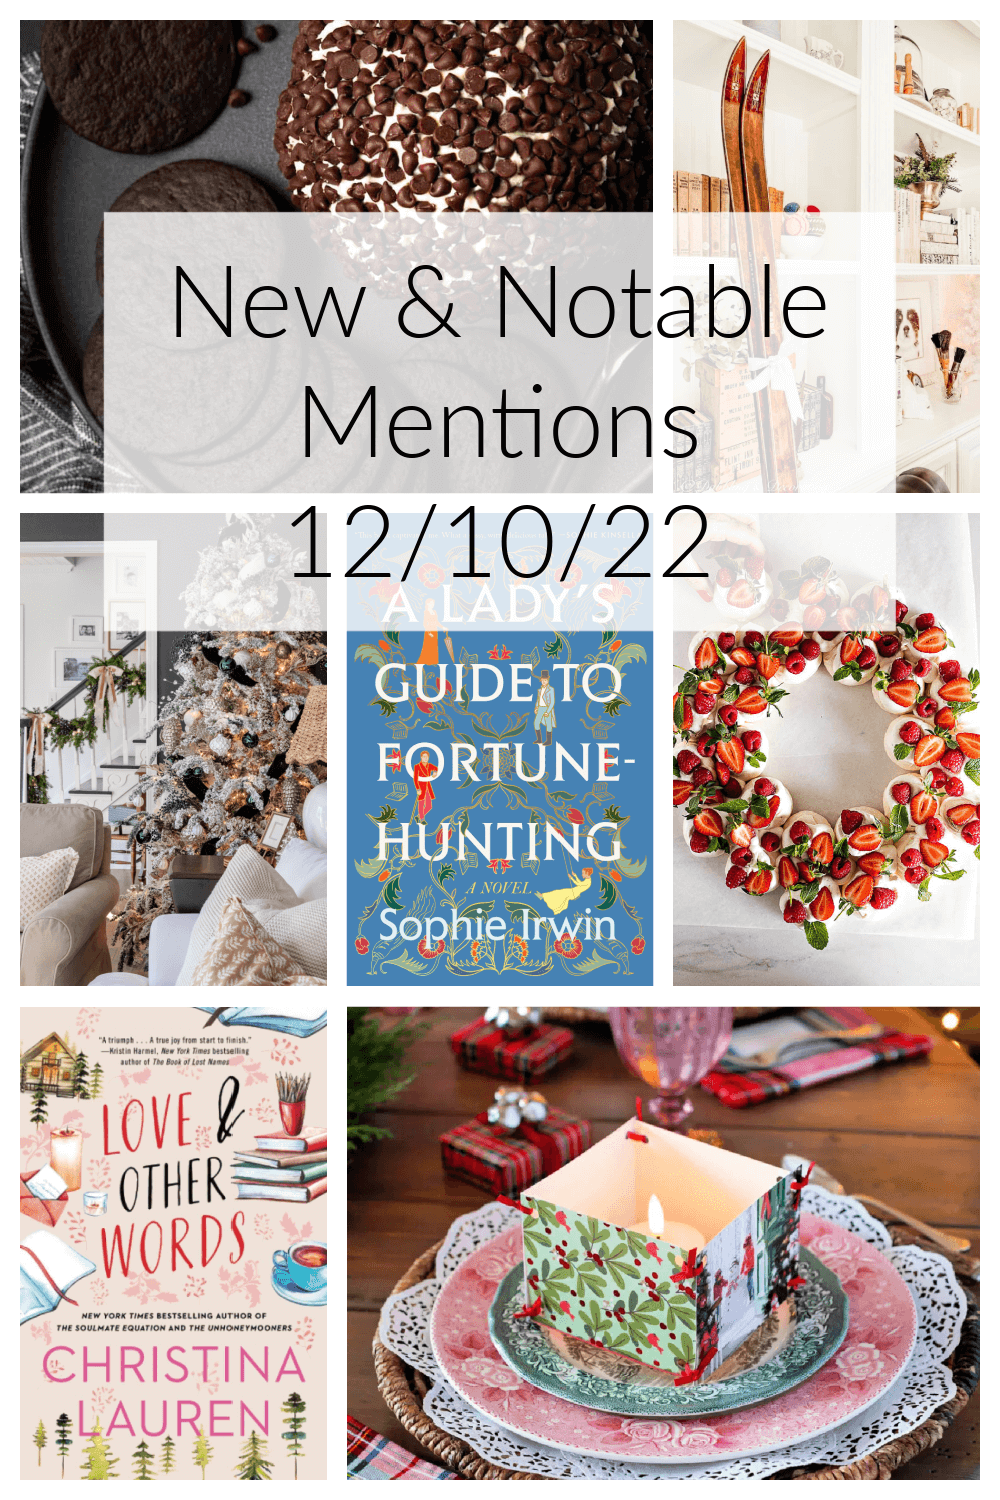 New & Notable Mentions 12/10/22